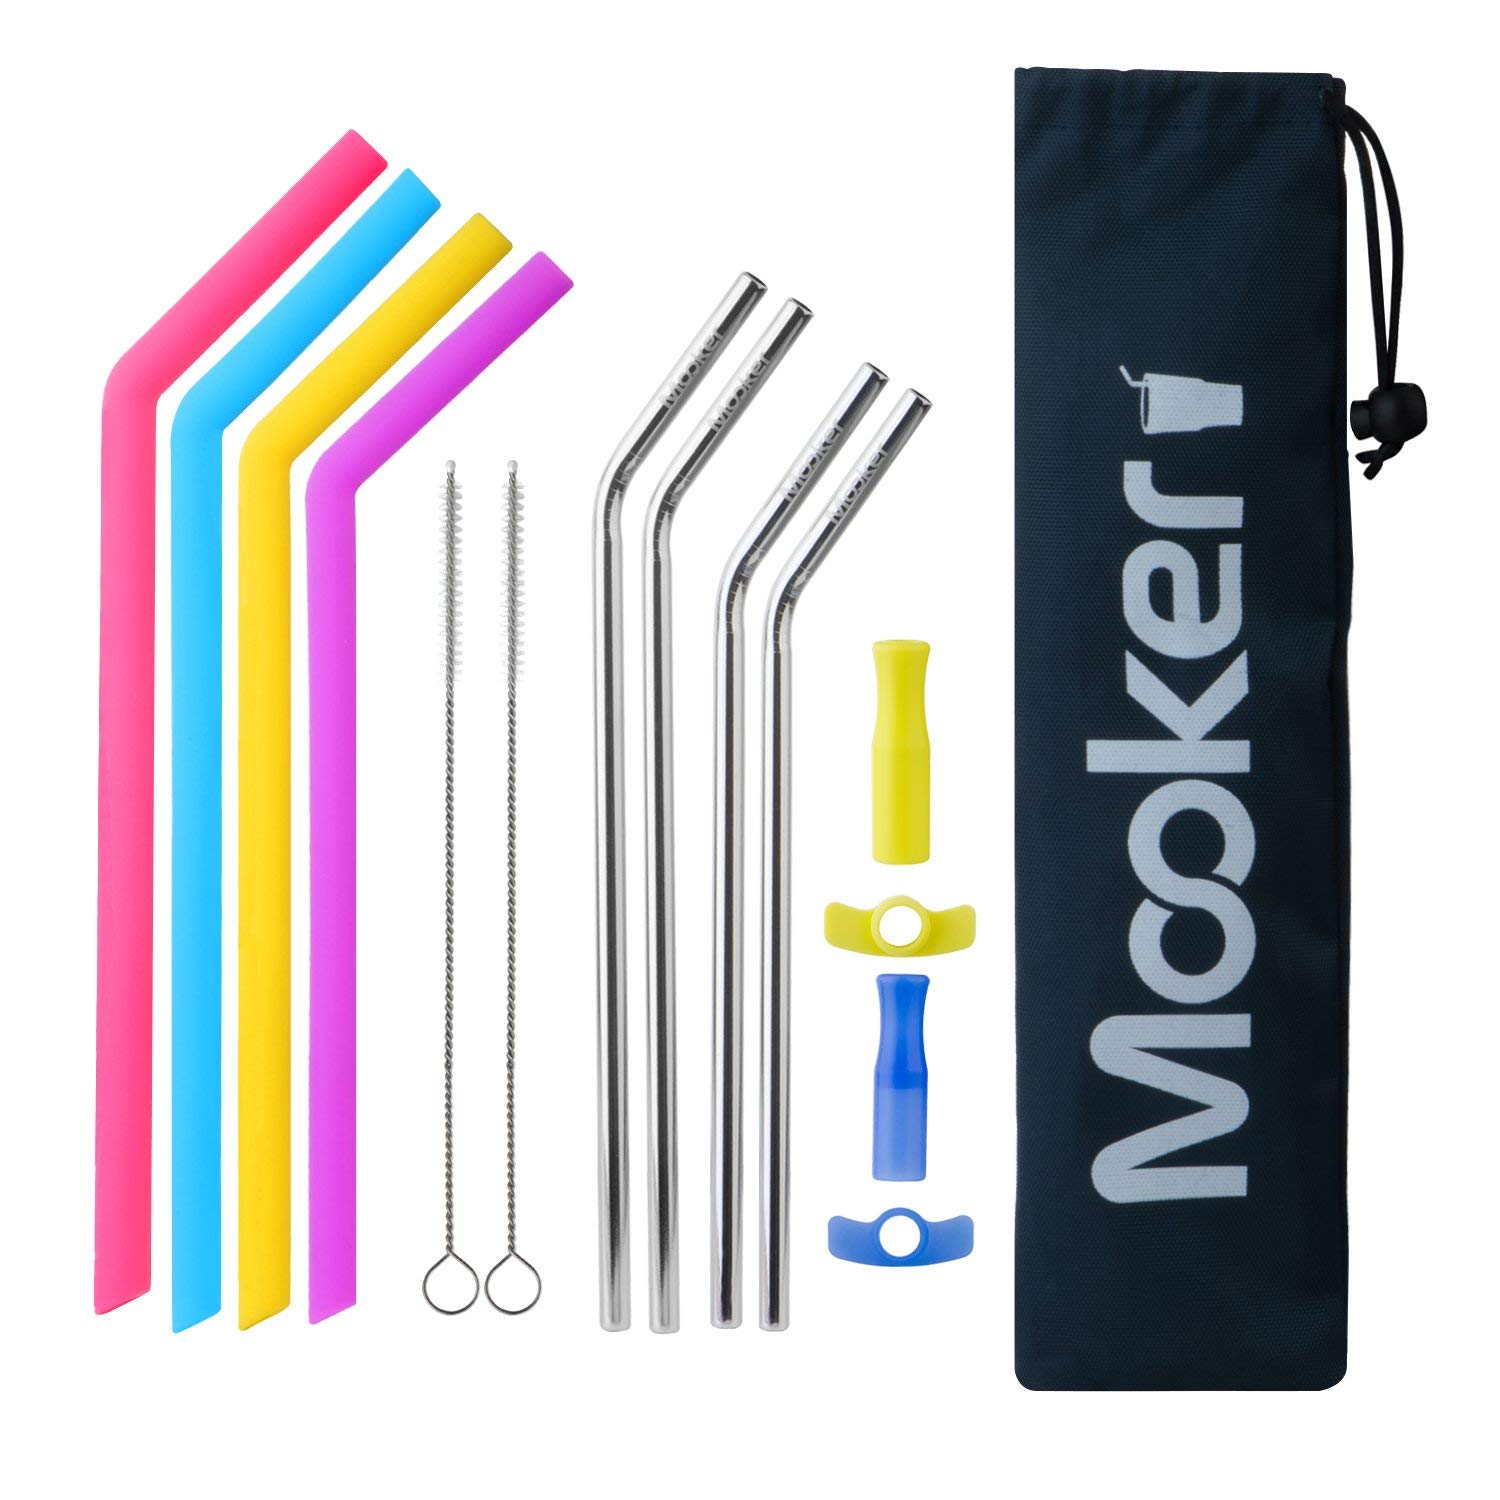 Mooker makes an affordable variety pack in the form of a travel kit that includes silicon straws (which have flexibility and are totally safe), as well as stainless steel straws with silicon tips.